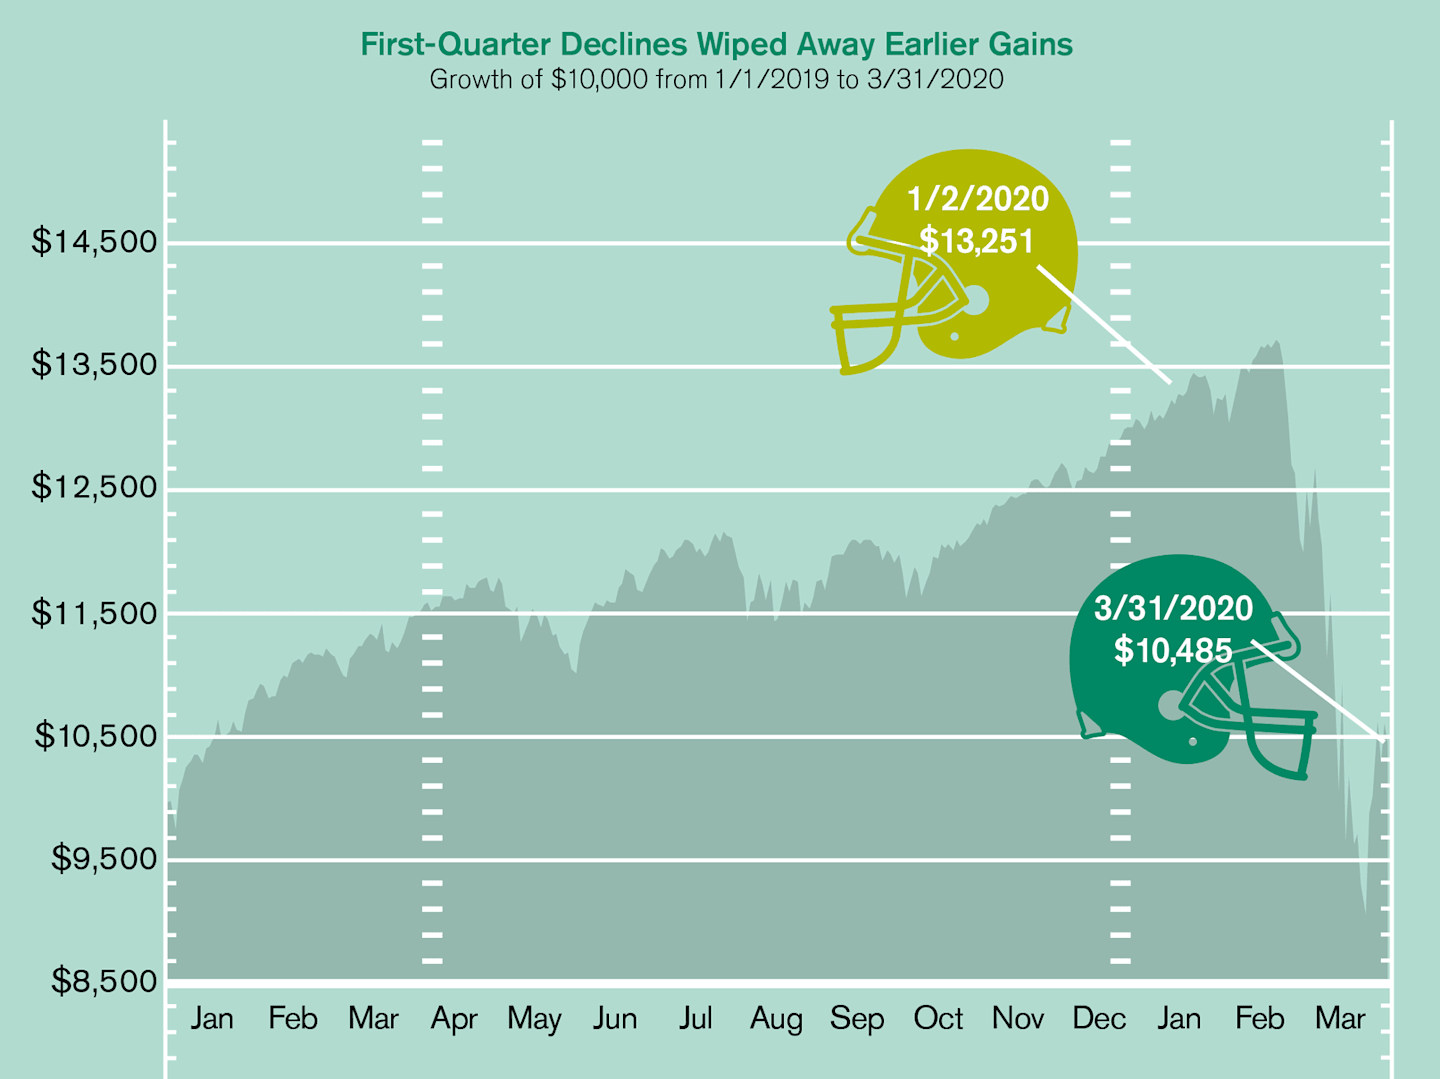 Wining with Defense: First-Quarter Declines Wiped Away Earlier Gains.